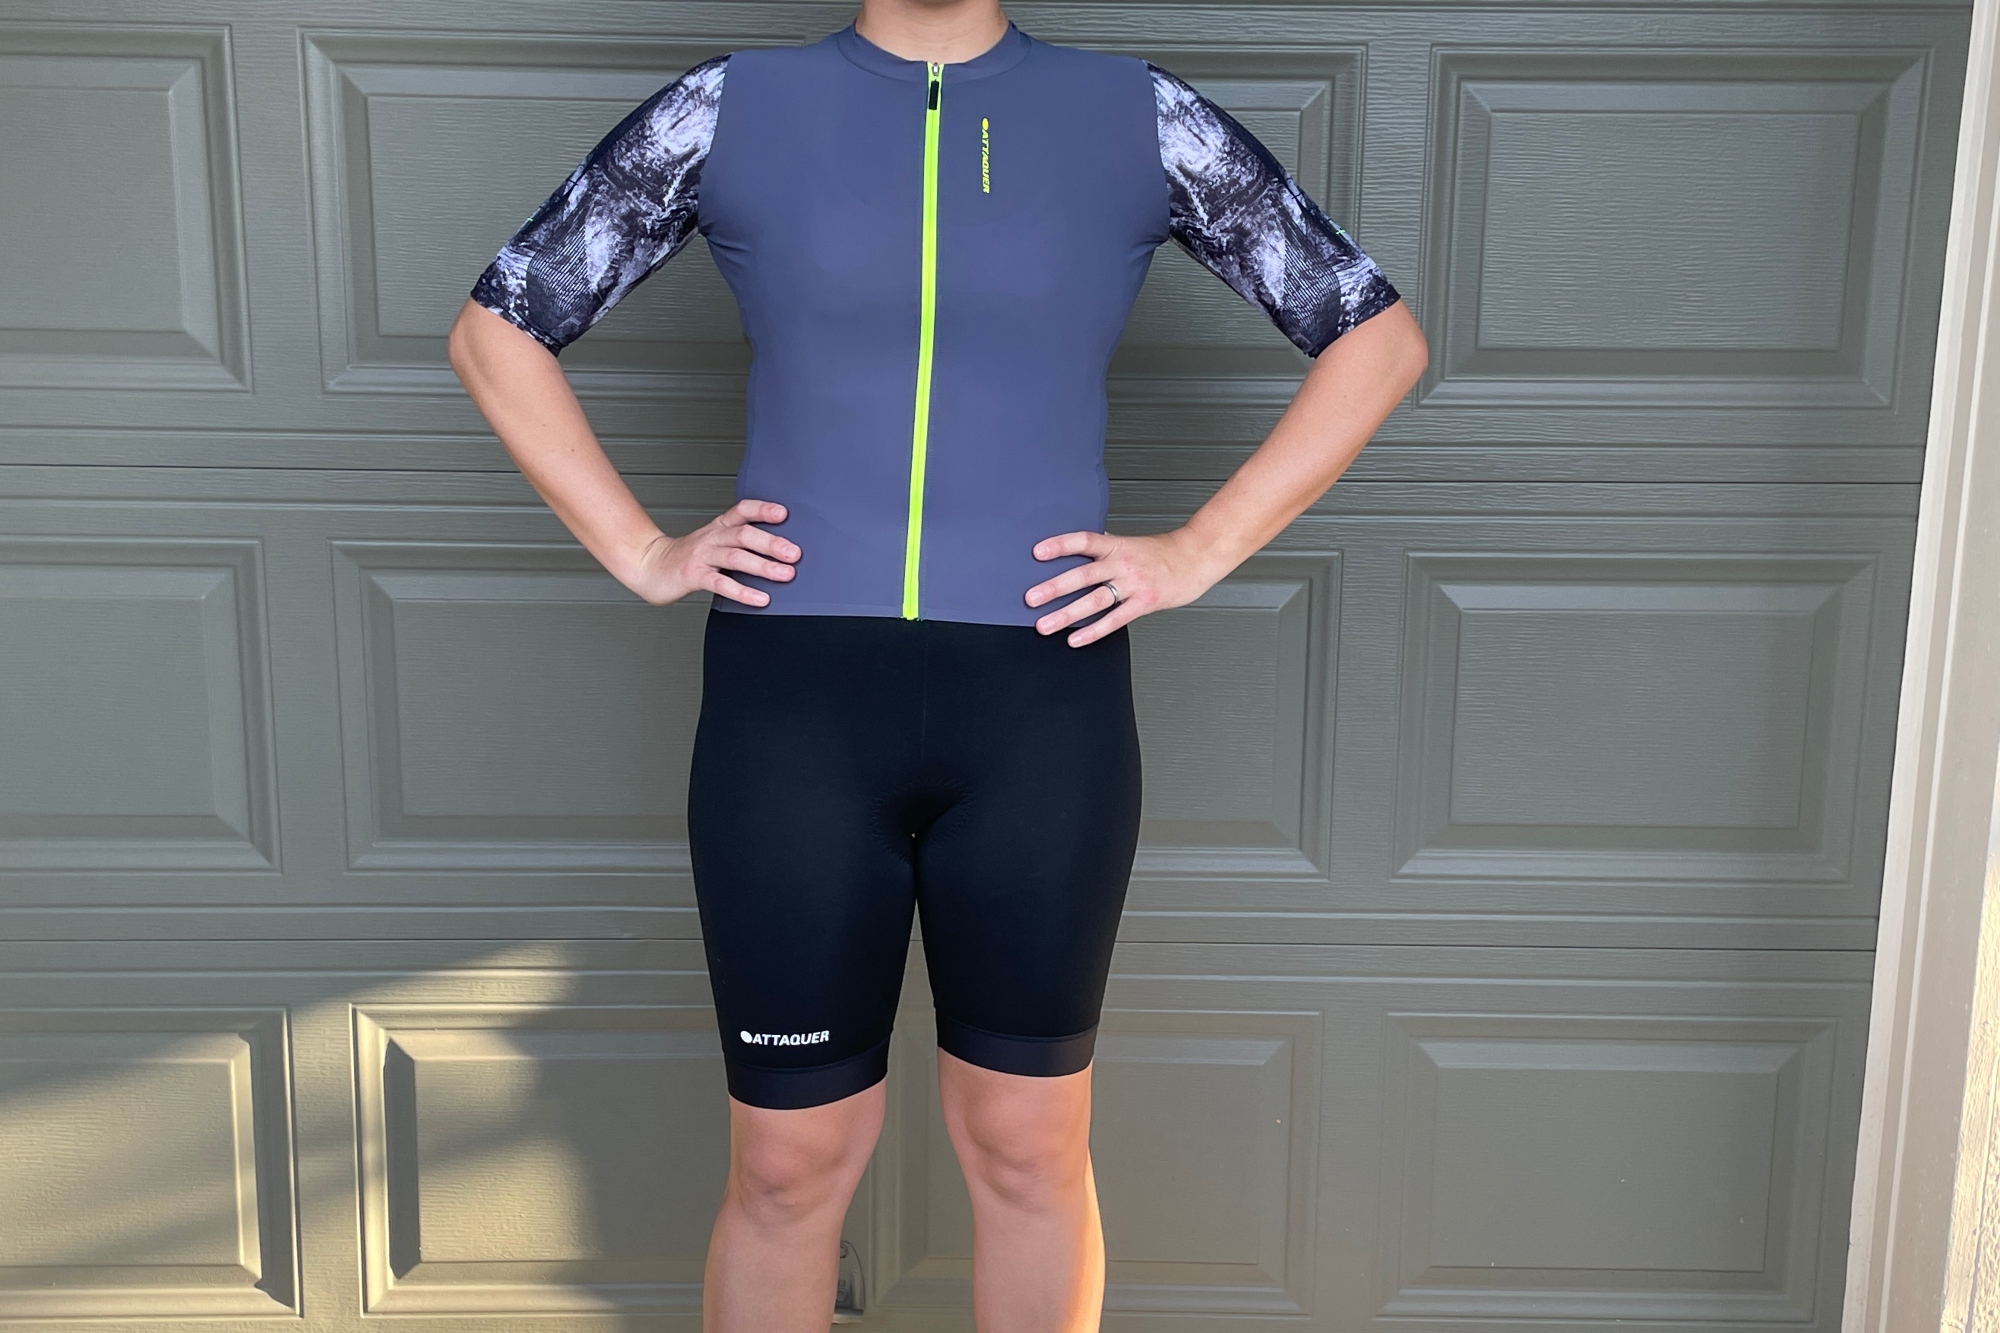 Woman cyclist wearing the Attaquer Erosion jersey